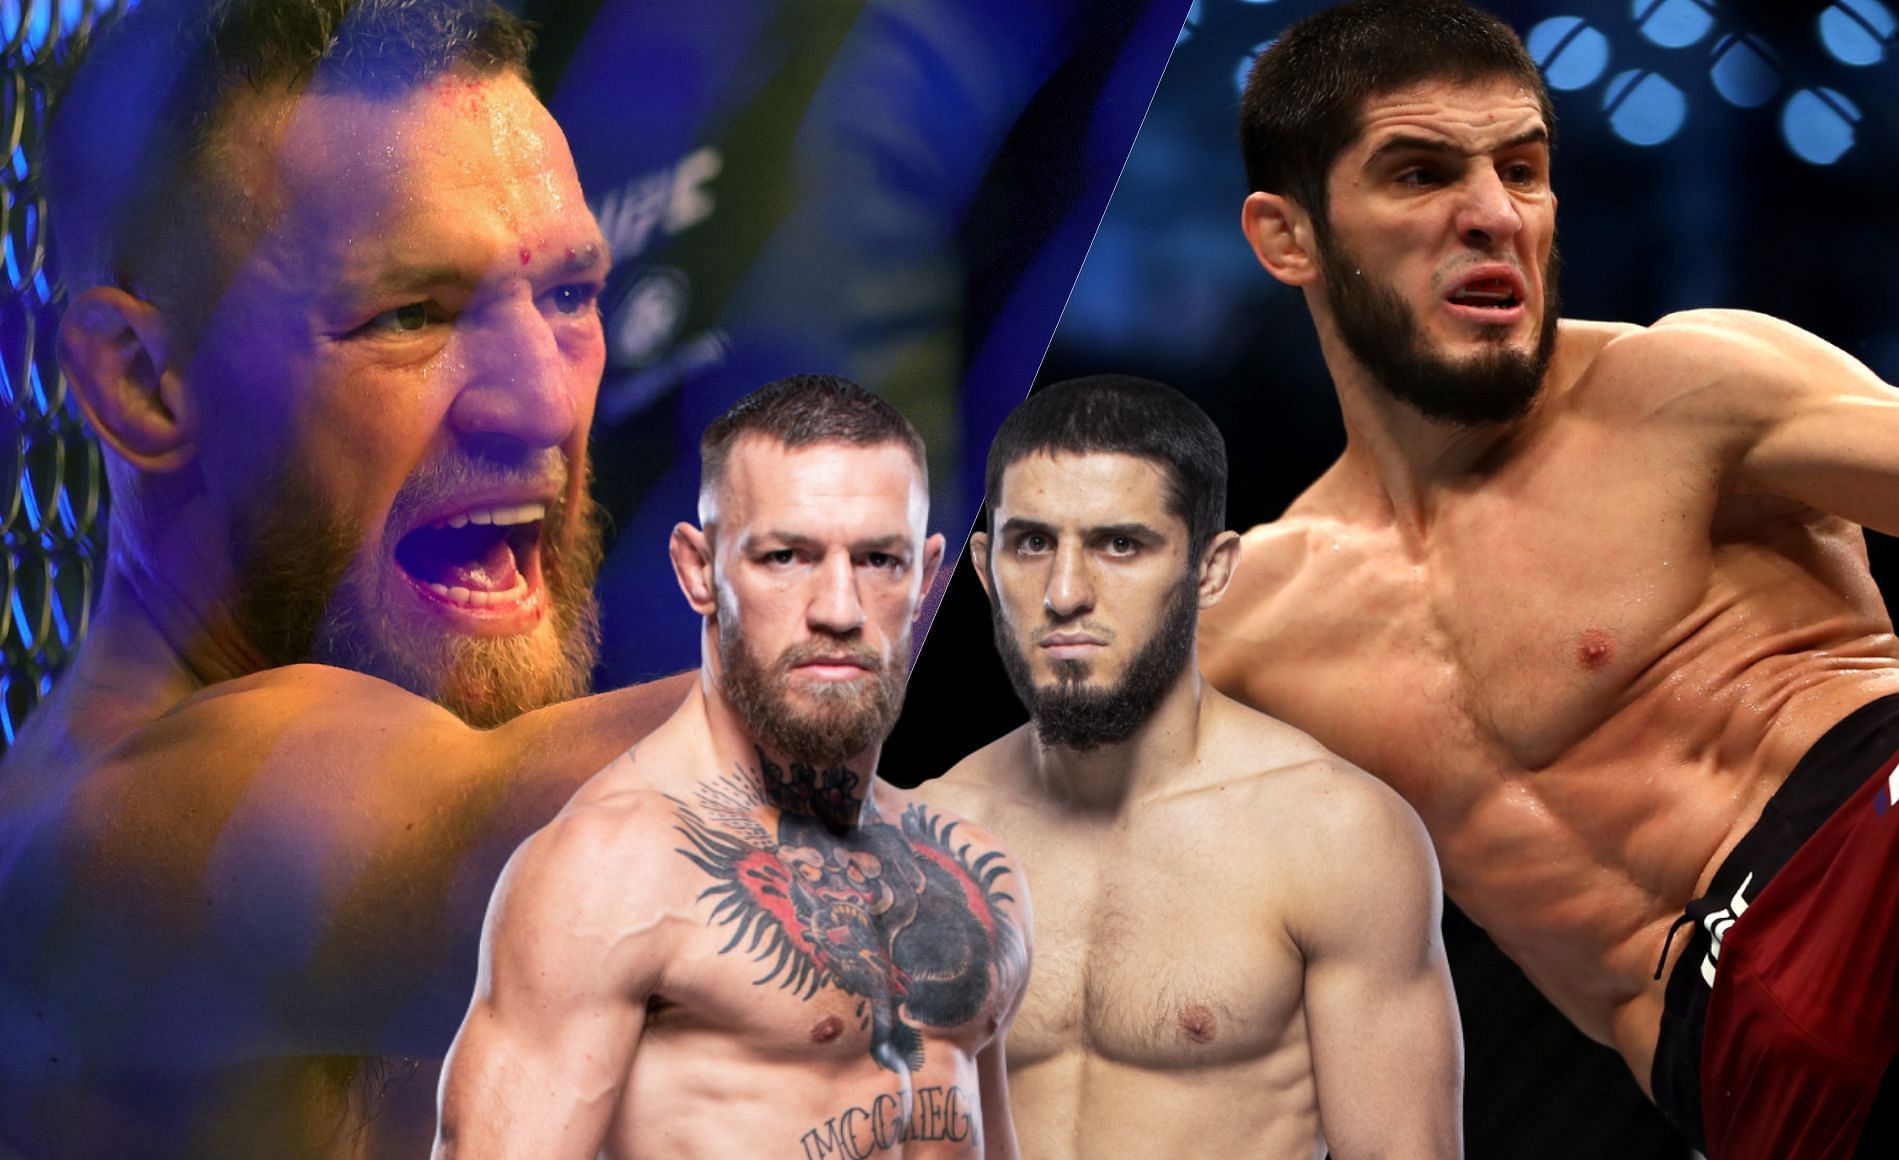 Conor McGregor (Left) says he will fight Islam Makhachev (Right) (Image courtesy of ufc.com)